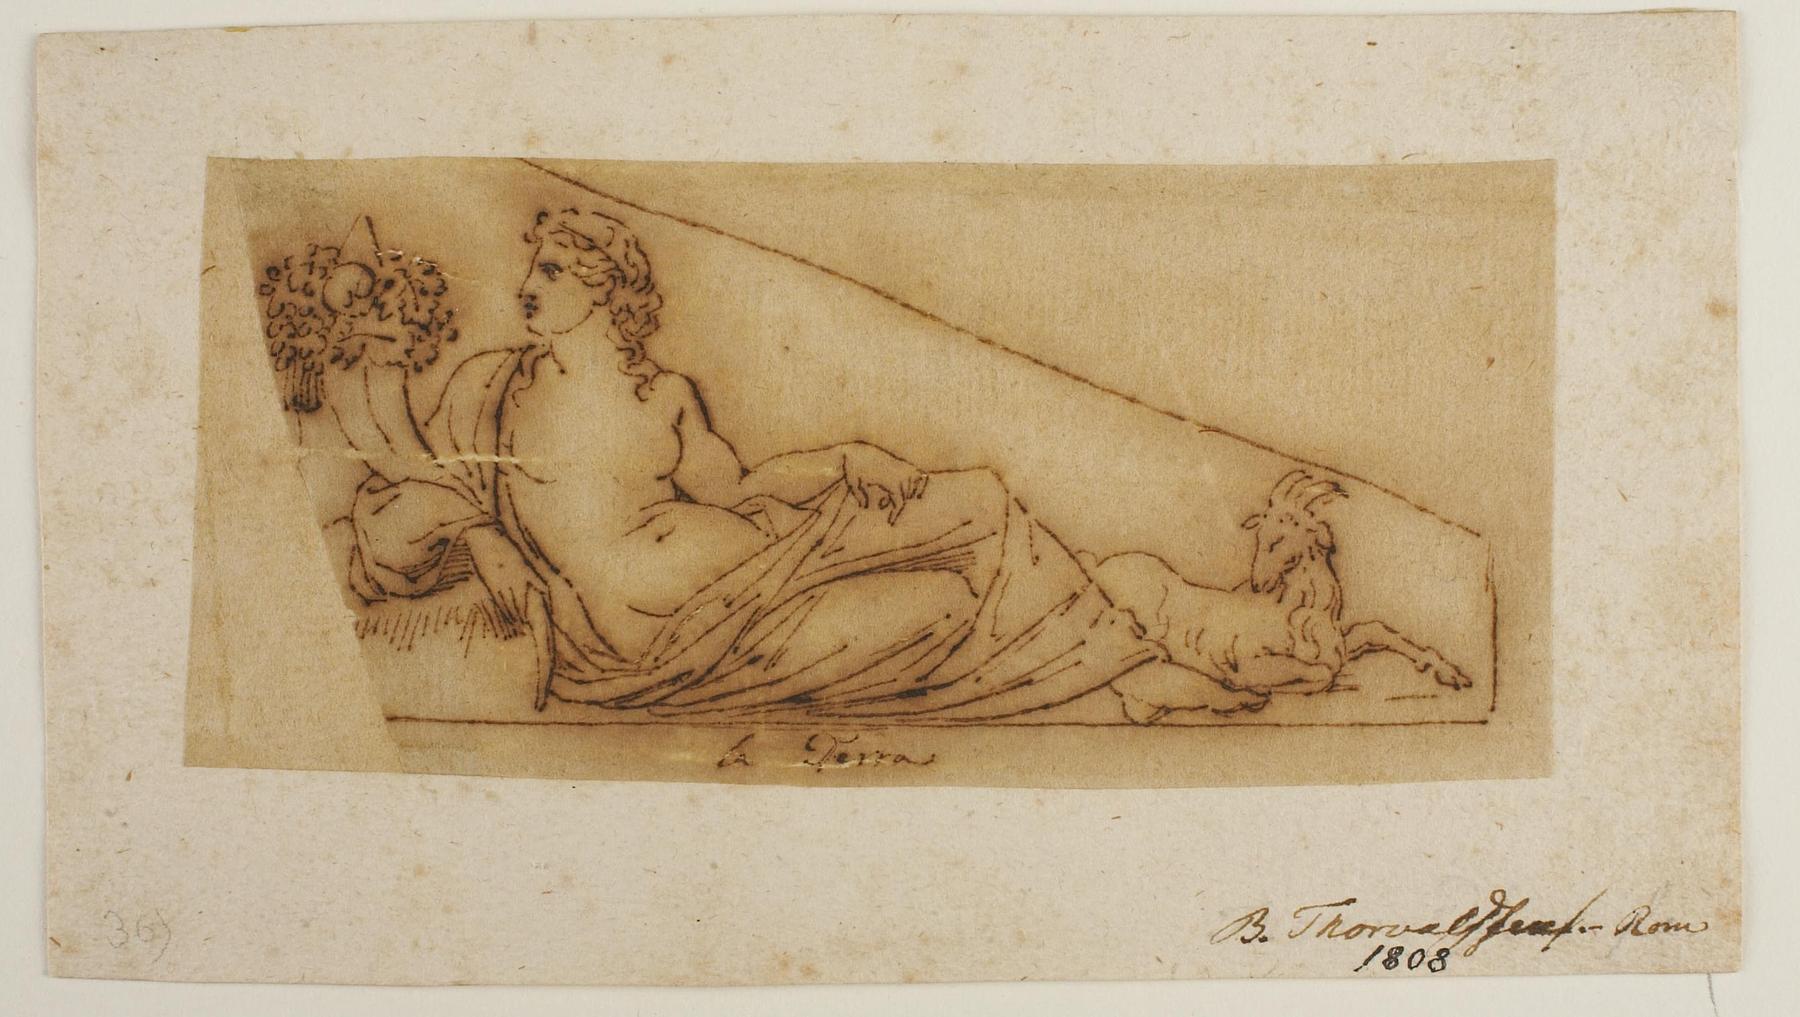 La Terra. Sketch of a figure at first intended for the Copenhagen City Hall and Court House, and later for the Pediment at Christiansborg Palace, CX6